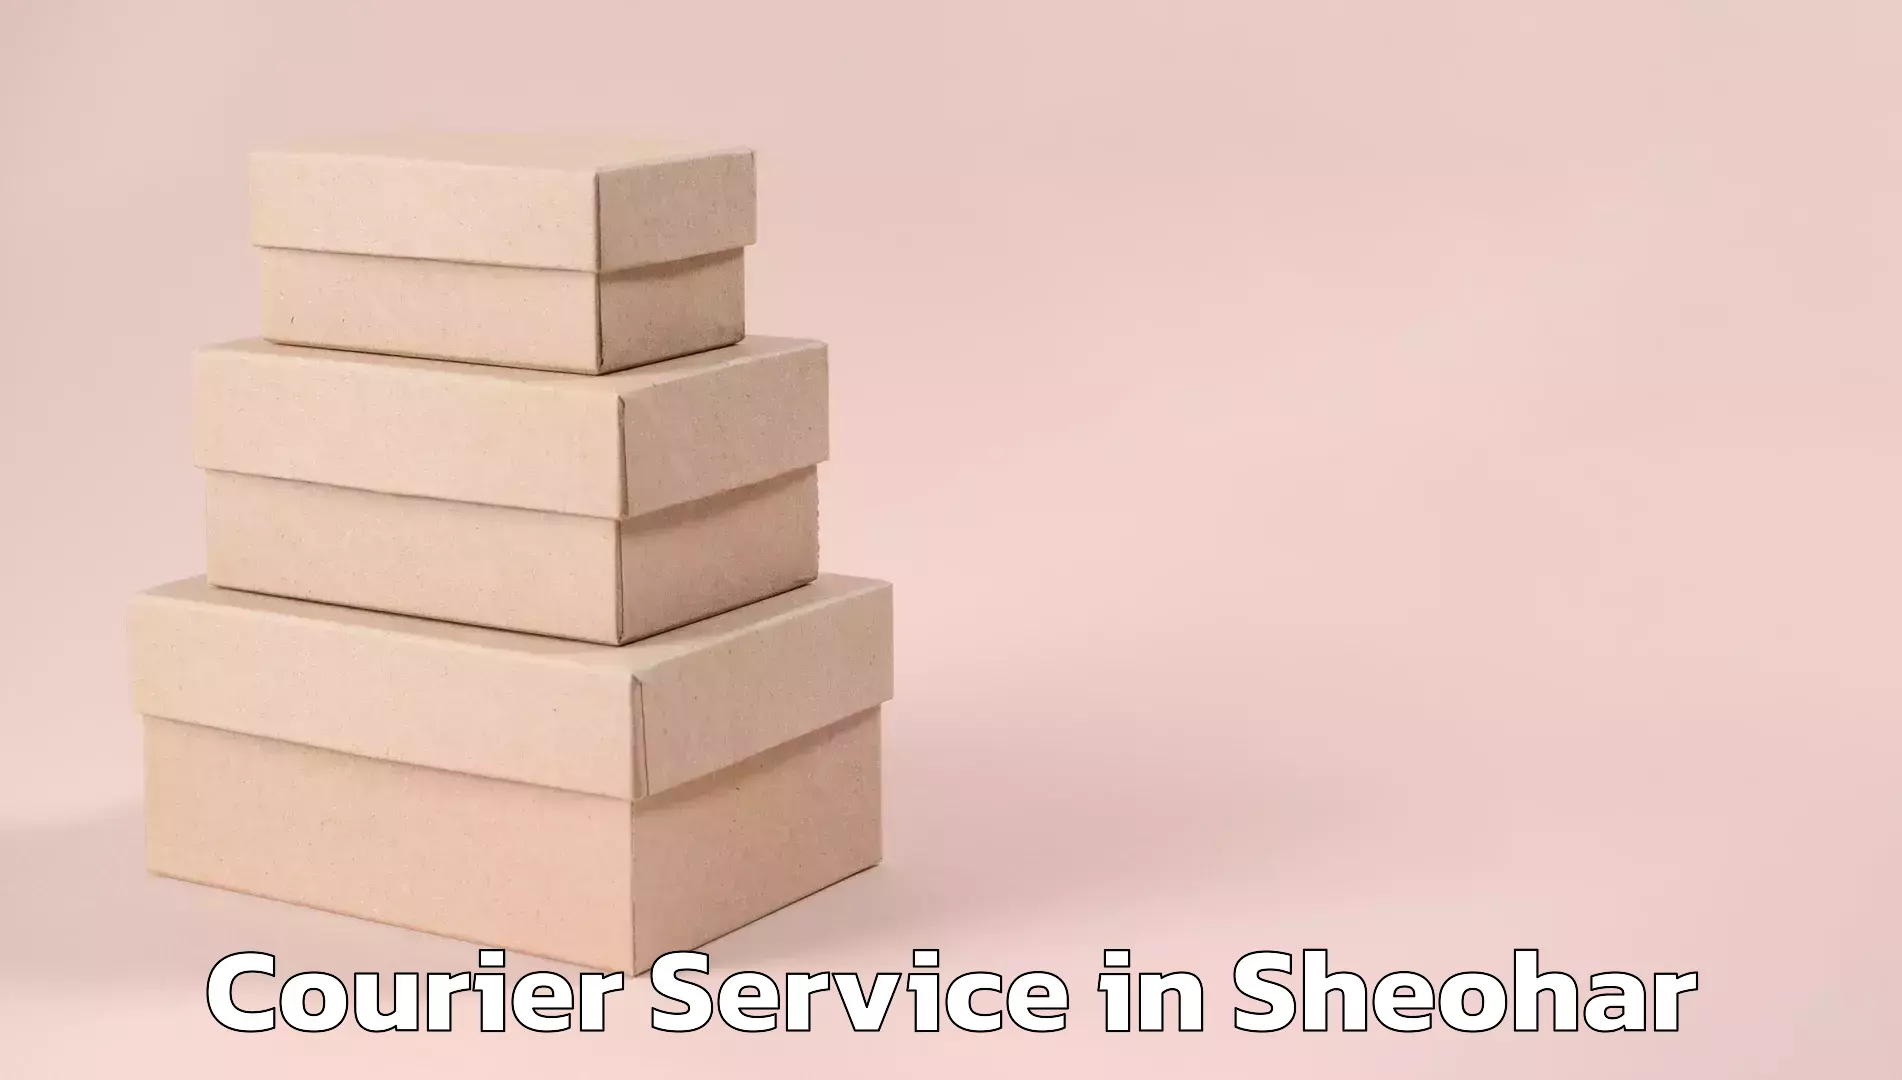 Air courier services in Sheohar